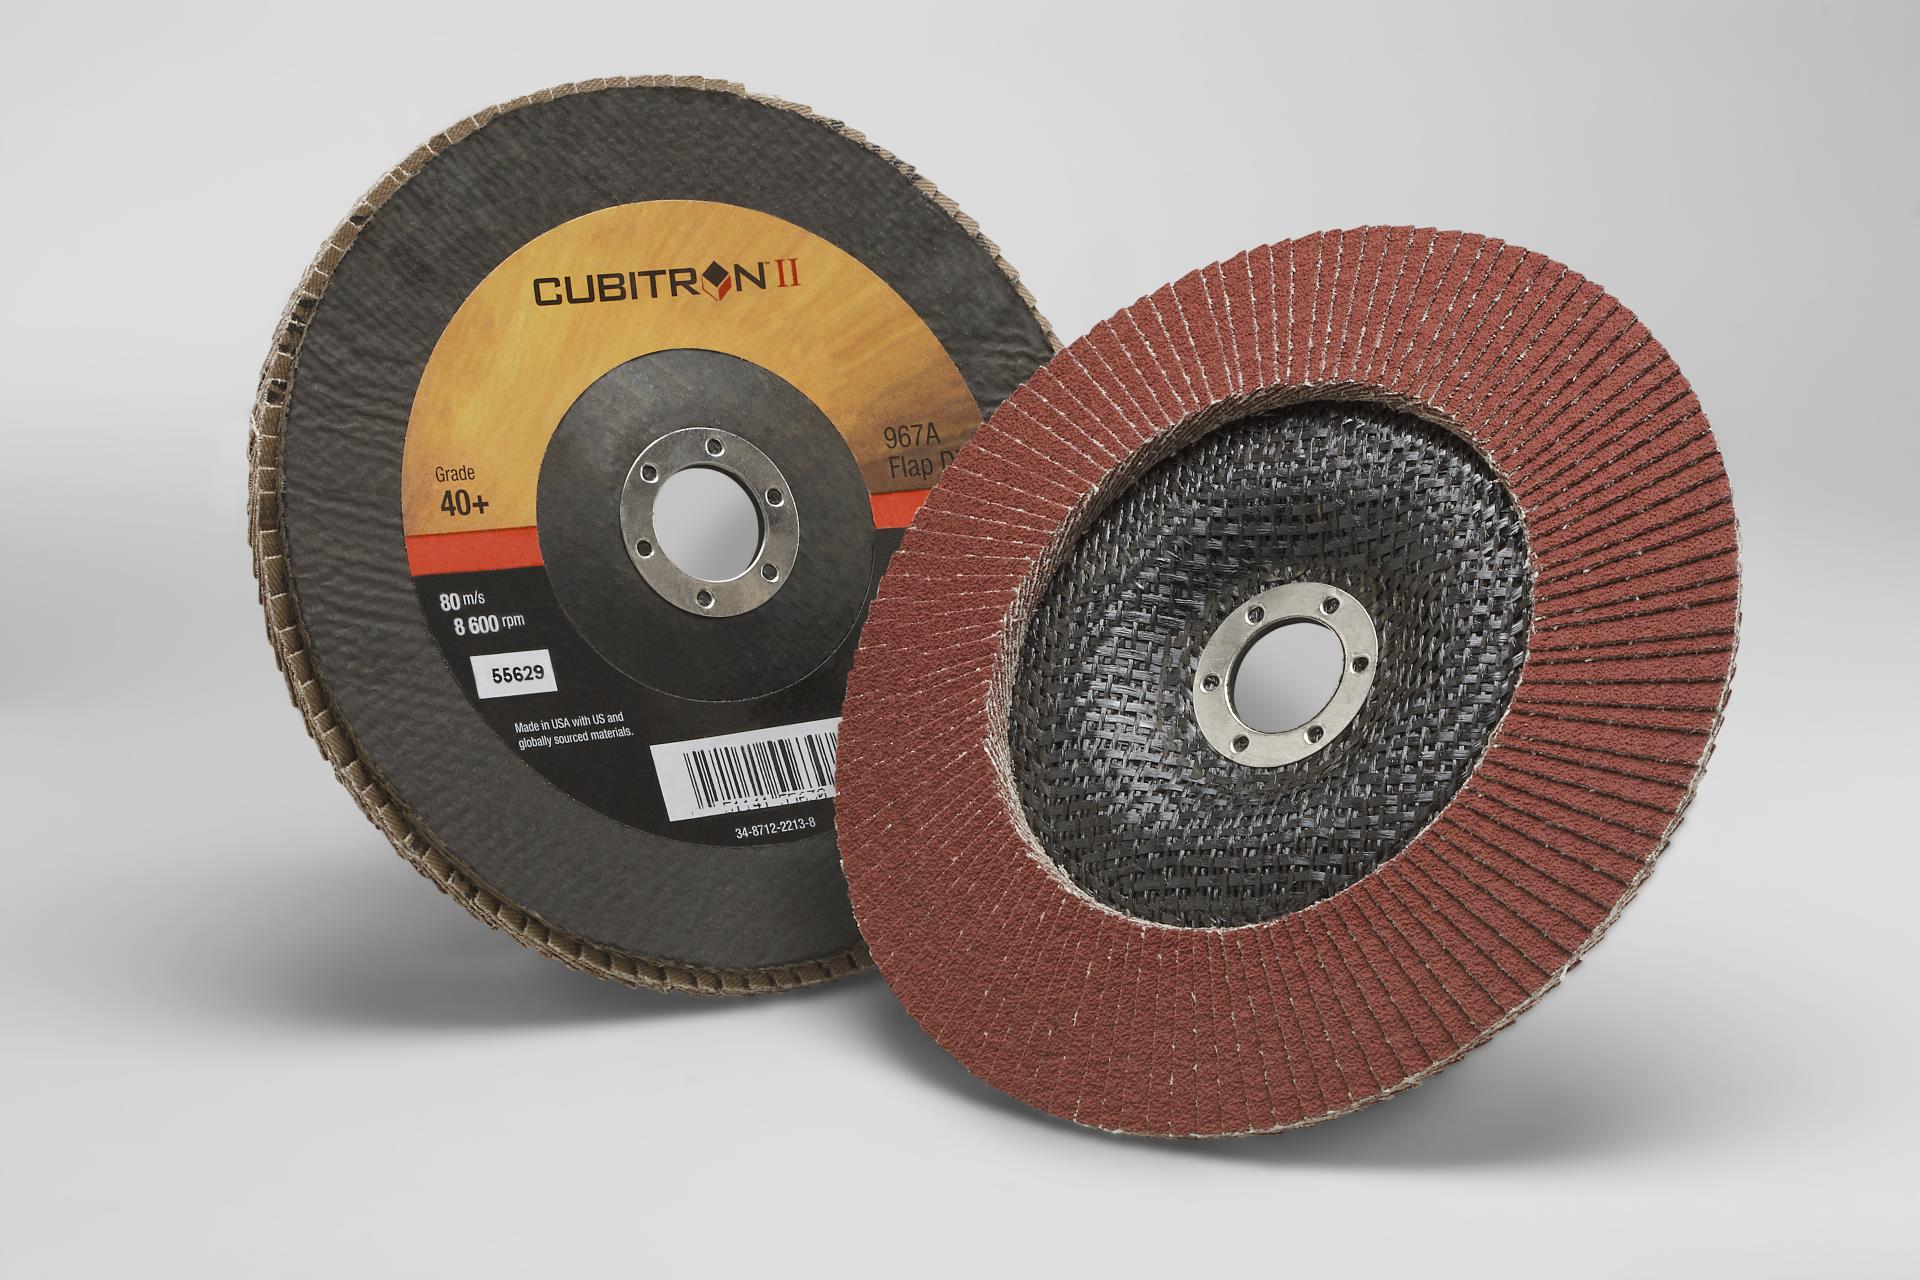 00051141556291 3M™ Cubitron™ II Flap Disc 967A, 40+, T29, in x 7/8 in,  per case Aircraft products tapes 6338239